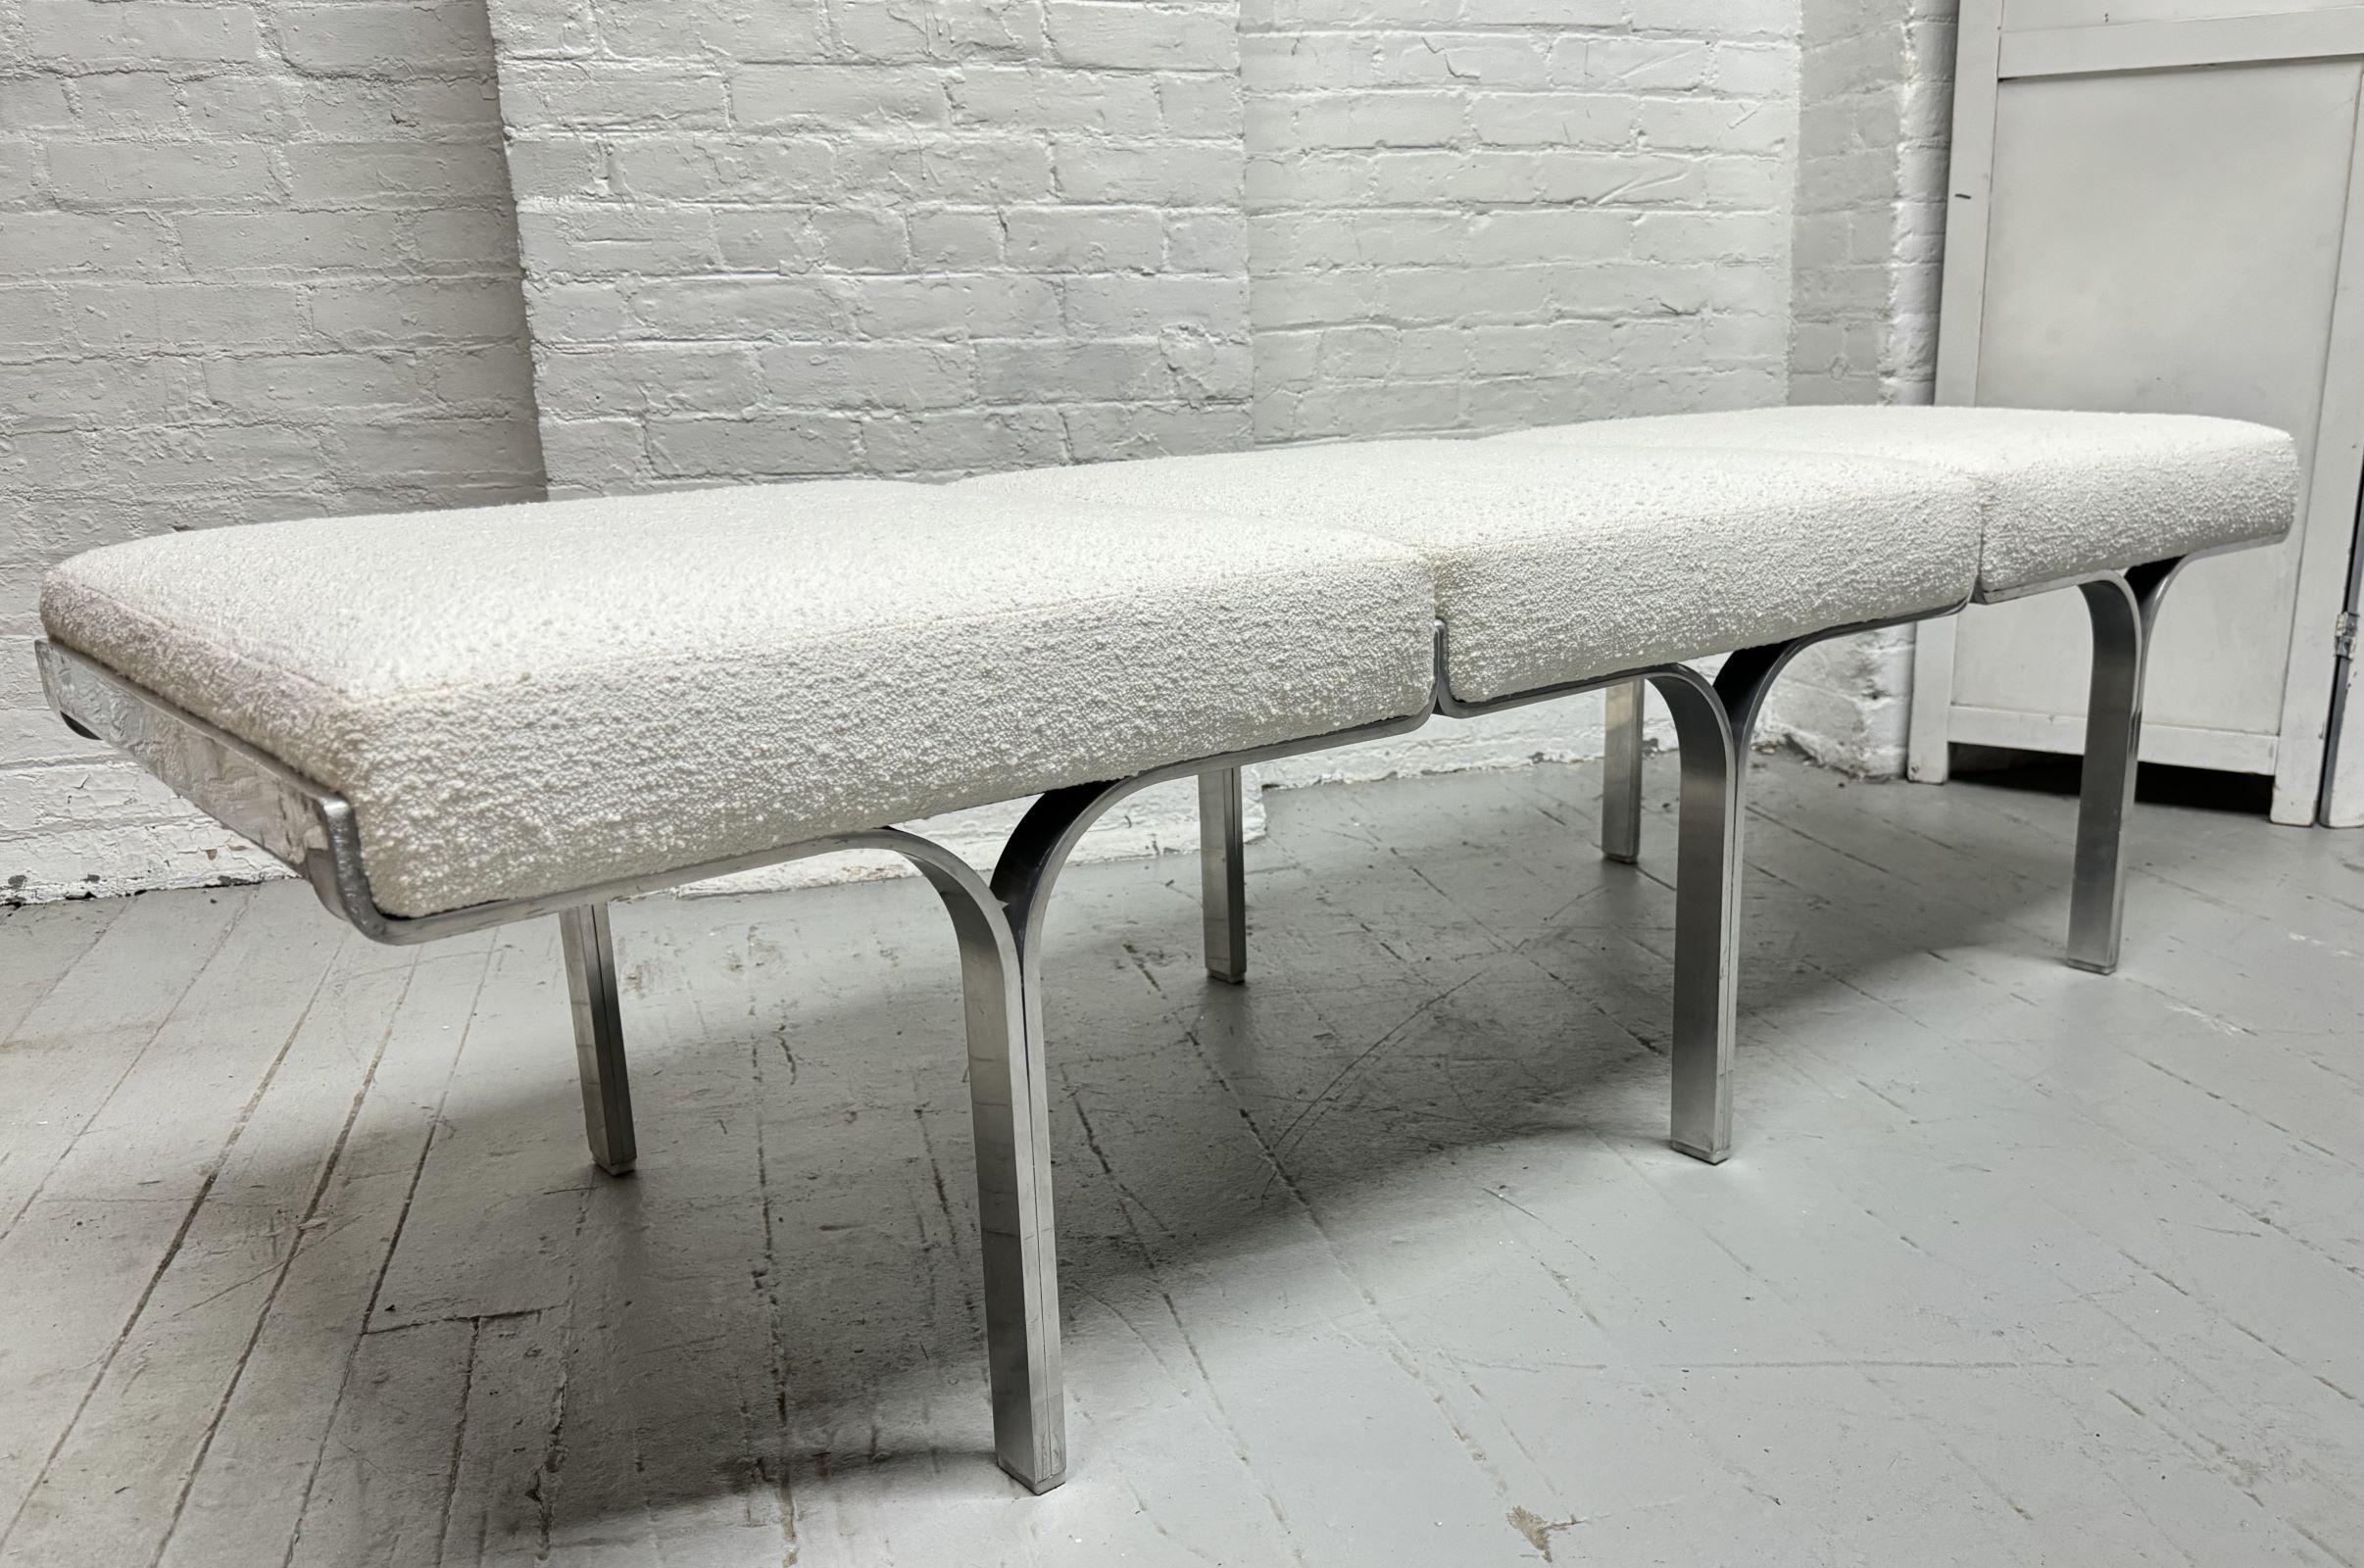 John Behringer 3-Seat Bench for J.G. Furniture Co. The sculptural frame is polished aluminum and upholstered in Bouclé.  